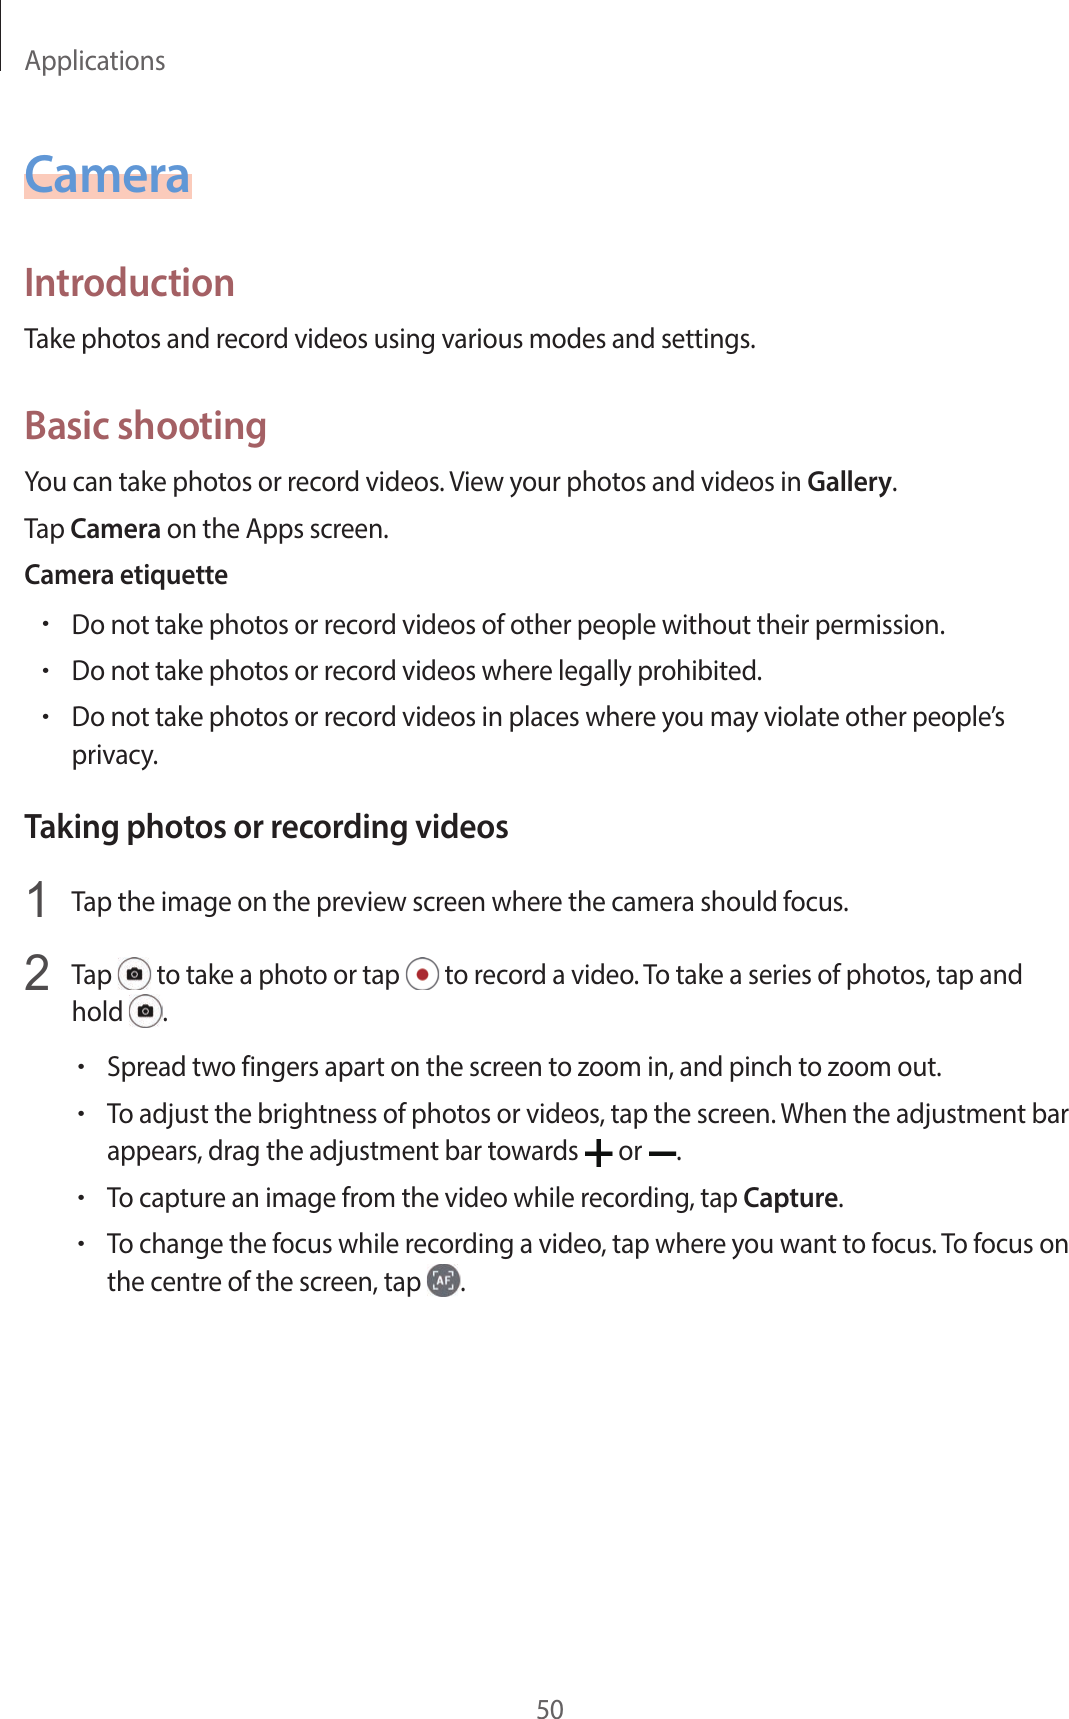 Applications50CameraIntroductionTake photos and record videos using various modes and settings.Basic shootingYou can take photos or record videos. View your photos and videos in Gallery.Tap Camera on the Apps screen.Camera etiquette•Do not take photos or record videos of other people without their permission.•Do not take photos or record videos where legally prohibited.•Do not take photos or record videos in places where you may violate other people’s privacy.Taking photos or recording videos1  Tap the image on the preview screen where the camera should focus.2  Tap   to take a photo or tap   to record a video. To take a series of photos, tap and hold  .•Spread two fingers apart on the screen to zoom in, and pinch to zoom out.•To adjust the brightness of photos or videos, tap the screen. When the adjustment bar appears, drag the adjustment bar towards   or  .•To capture an image from the video while recording, tap Capture.•To change the focus while recording a video, tap where you want to focus. To focus on the centre of the screen, tap  .